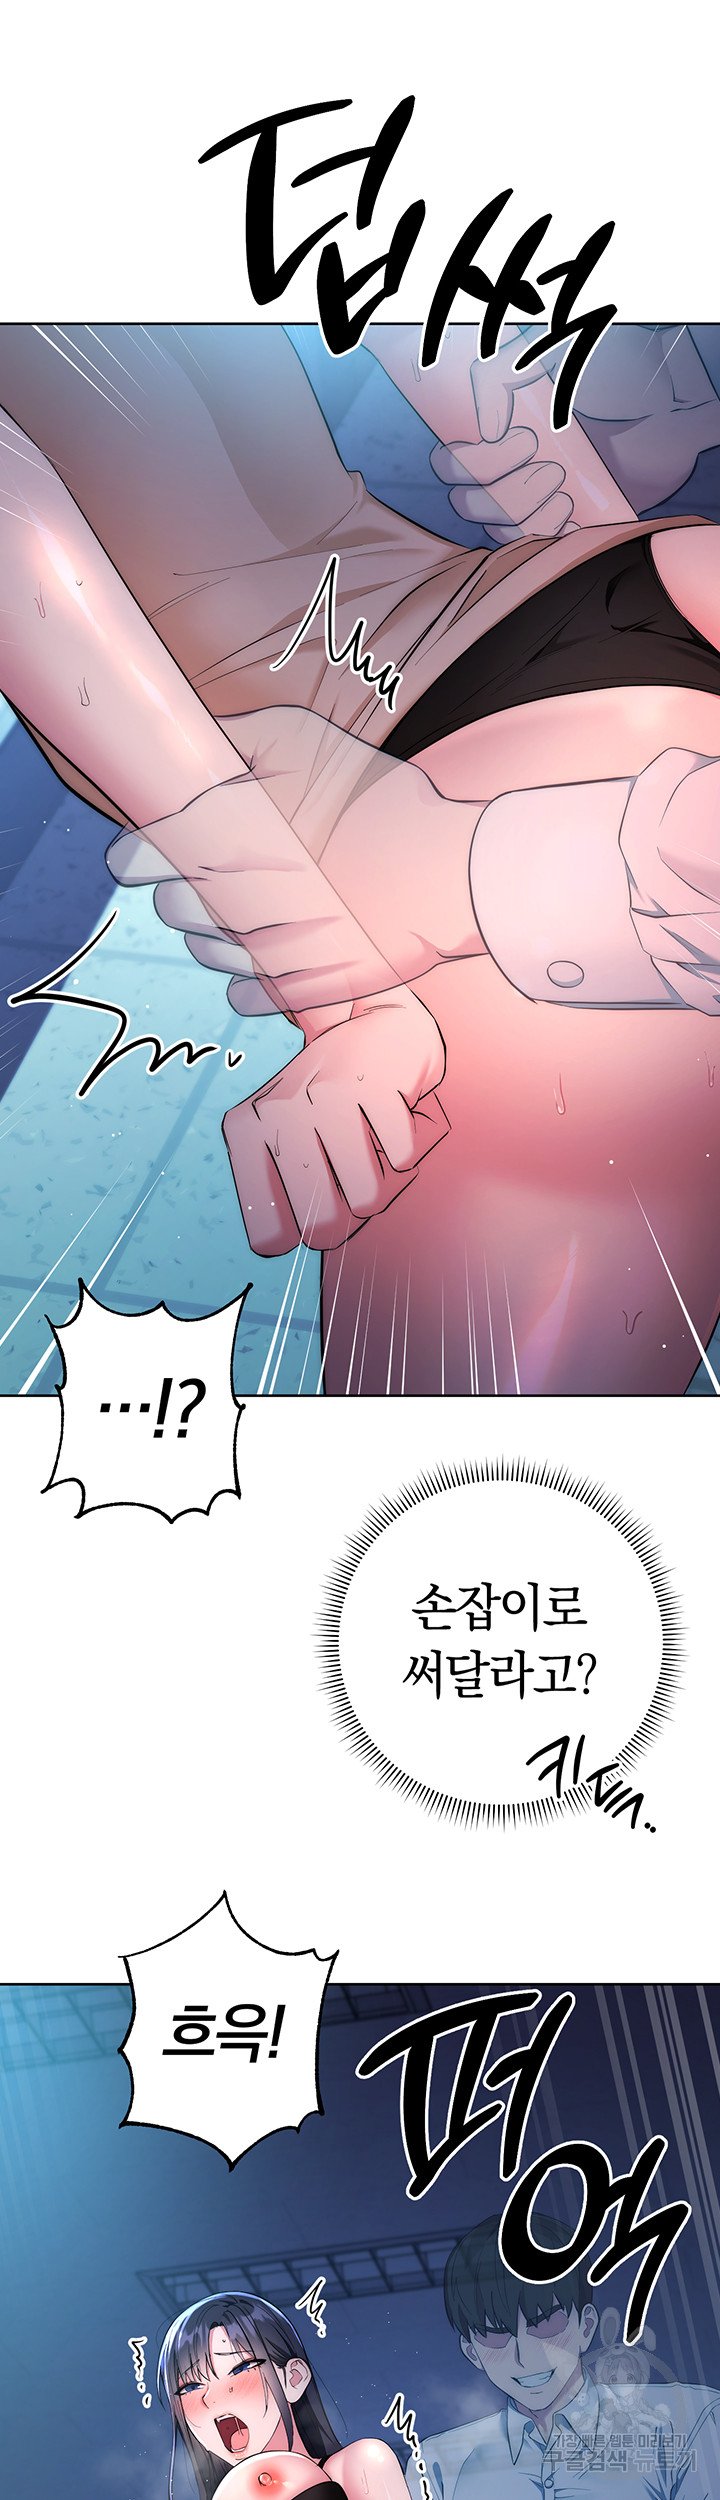 outsider-the-invisible-man-raw-chap-3-41